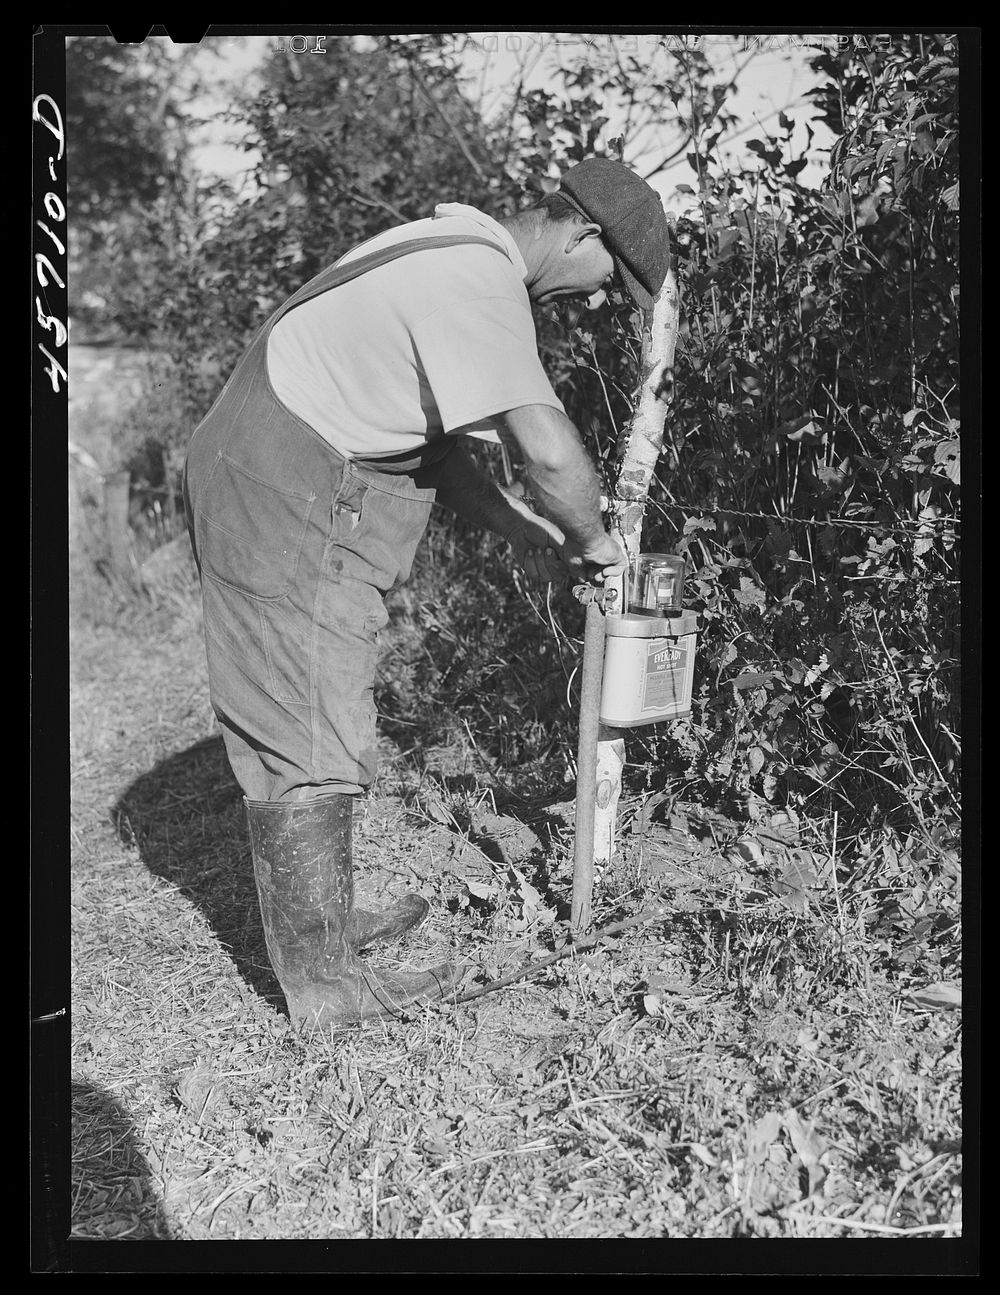 Mr. William Gaynor connecting the electric fence on his farm near Fairfield, Vermont. Sourced from the Library of Congress.